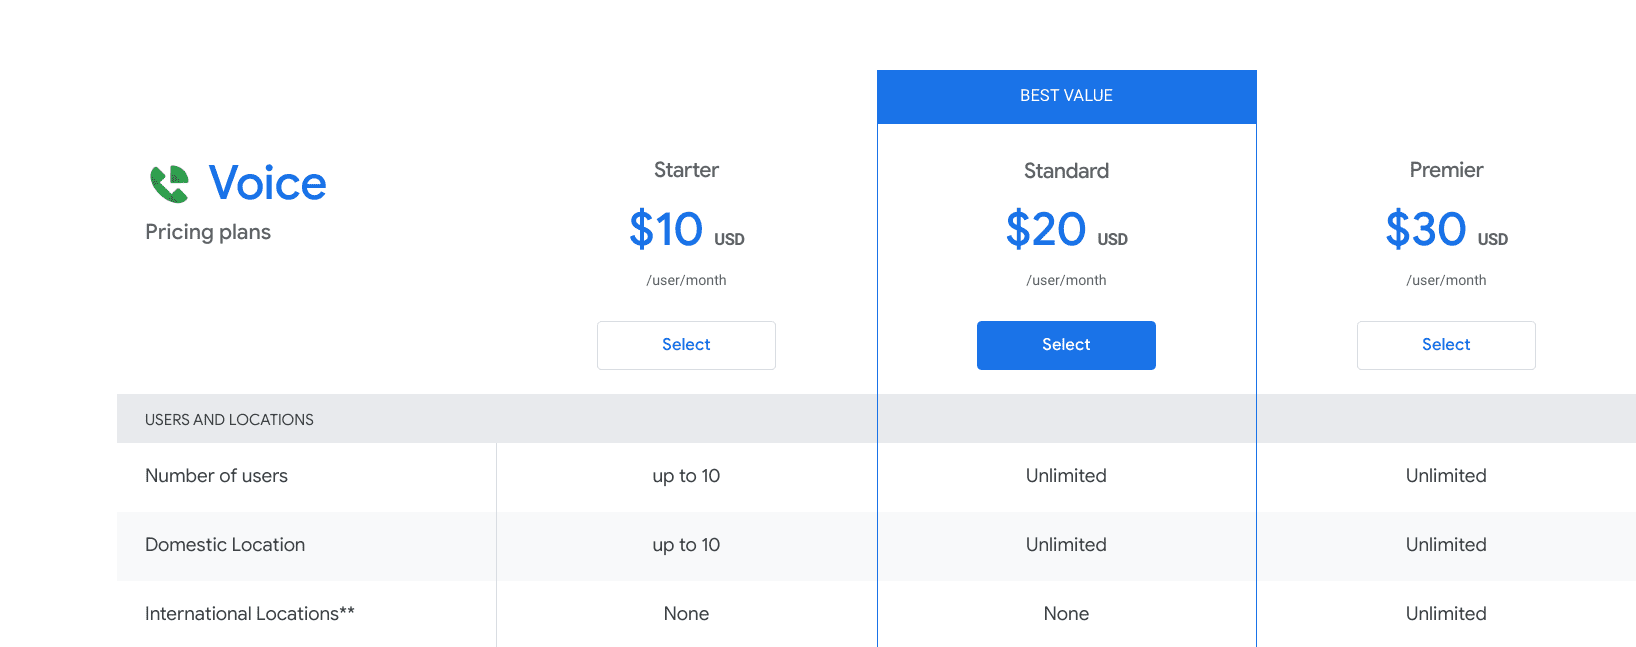 Google Voice pricing and plans